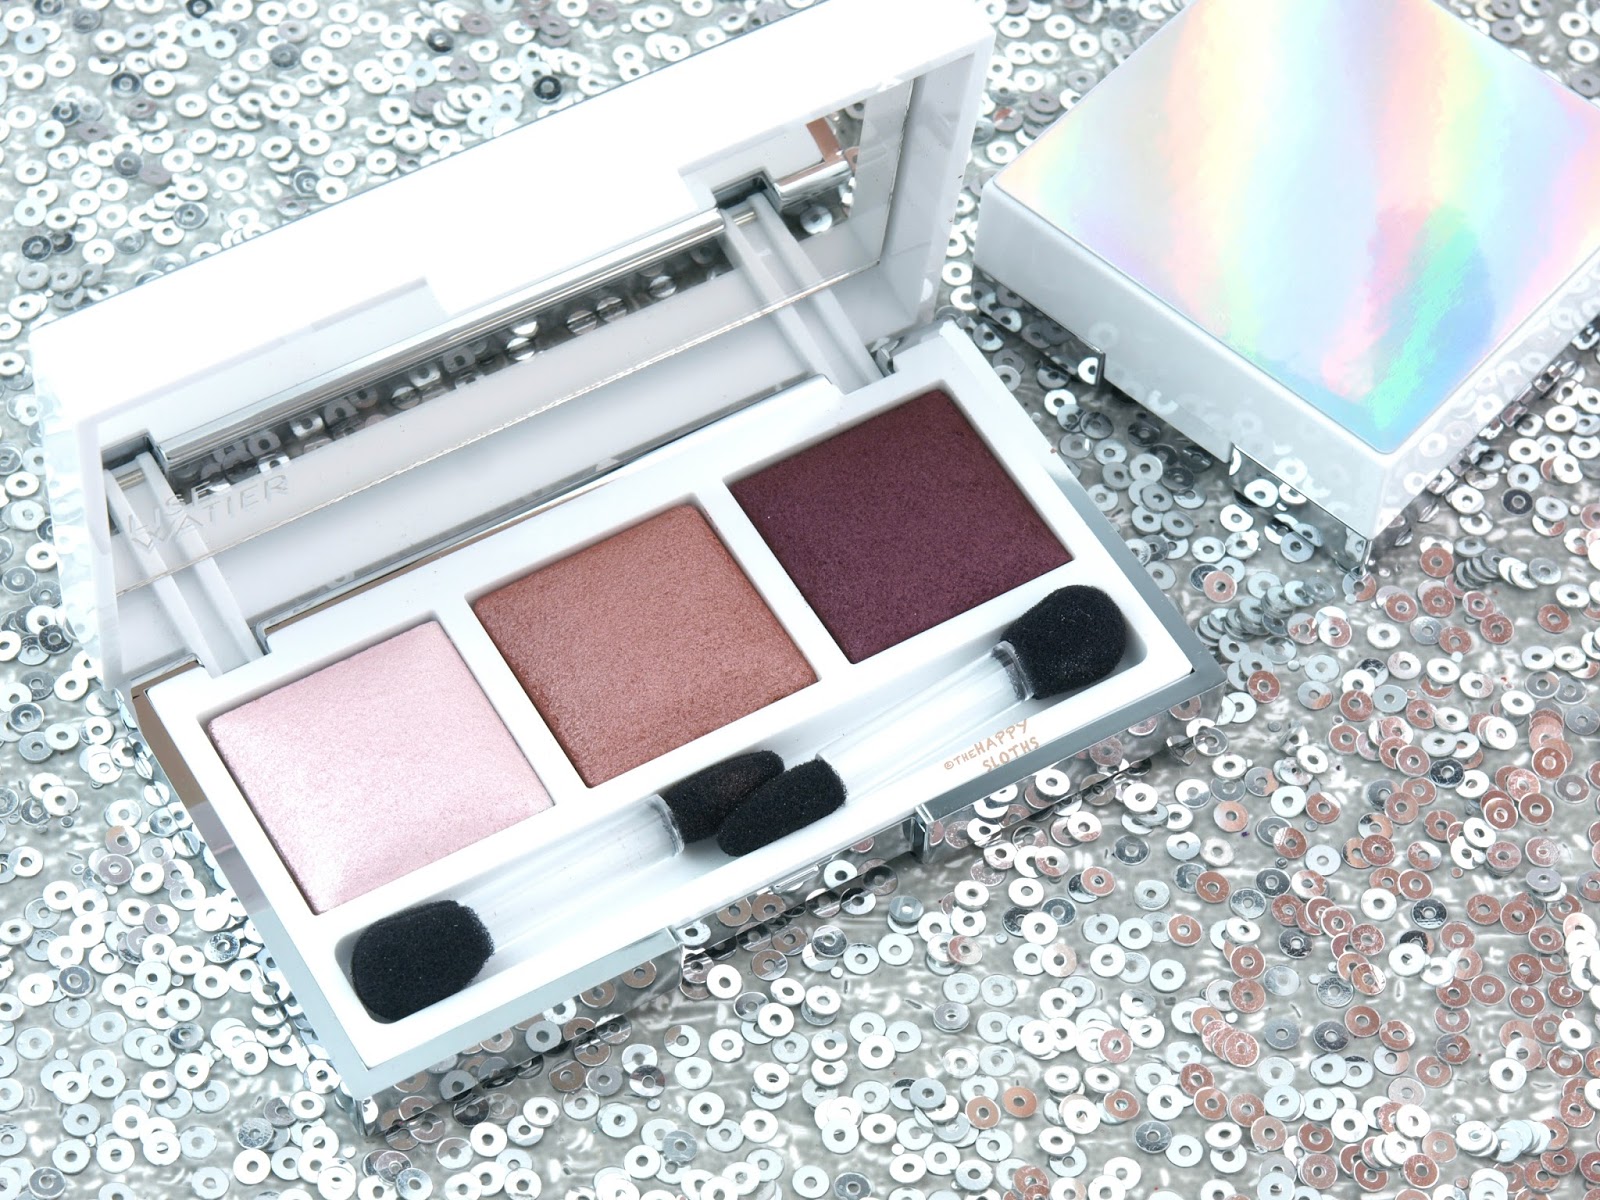 Lise Watier | Spring 2018 Urban Velocity Trio Baked Eyeshadow Palette: Review and Swatches